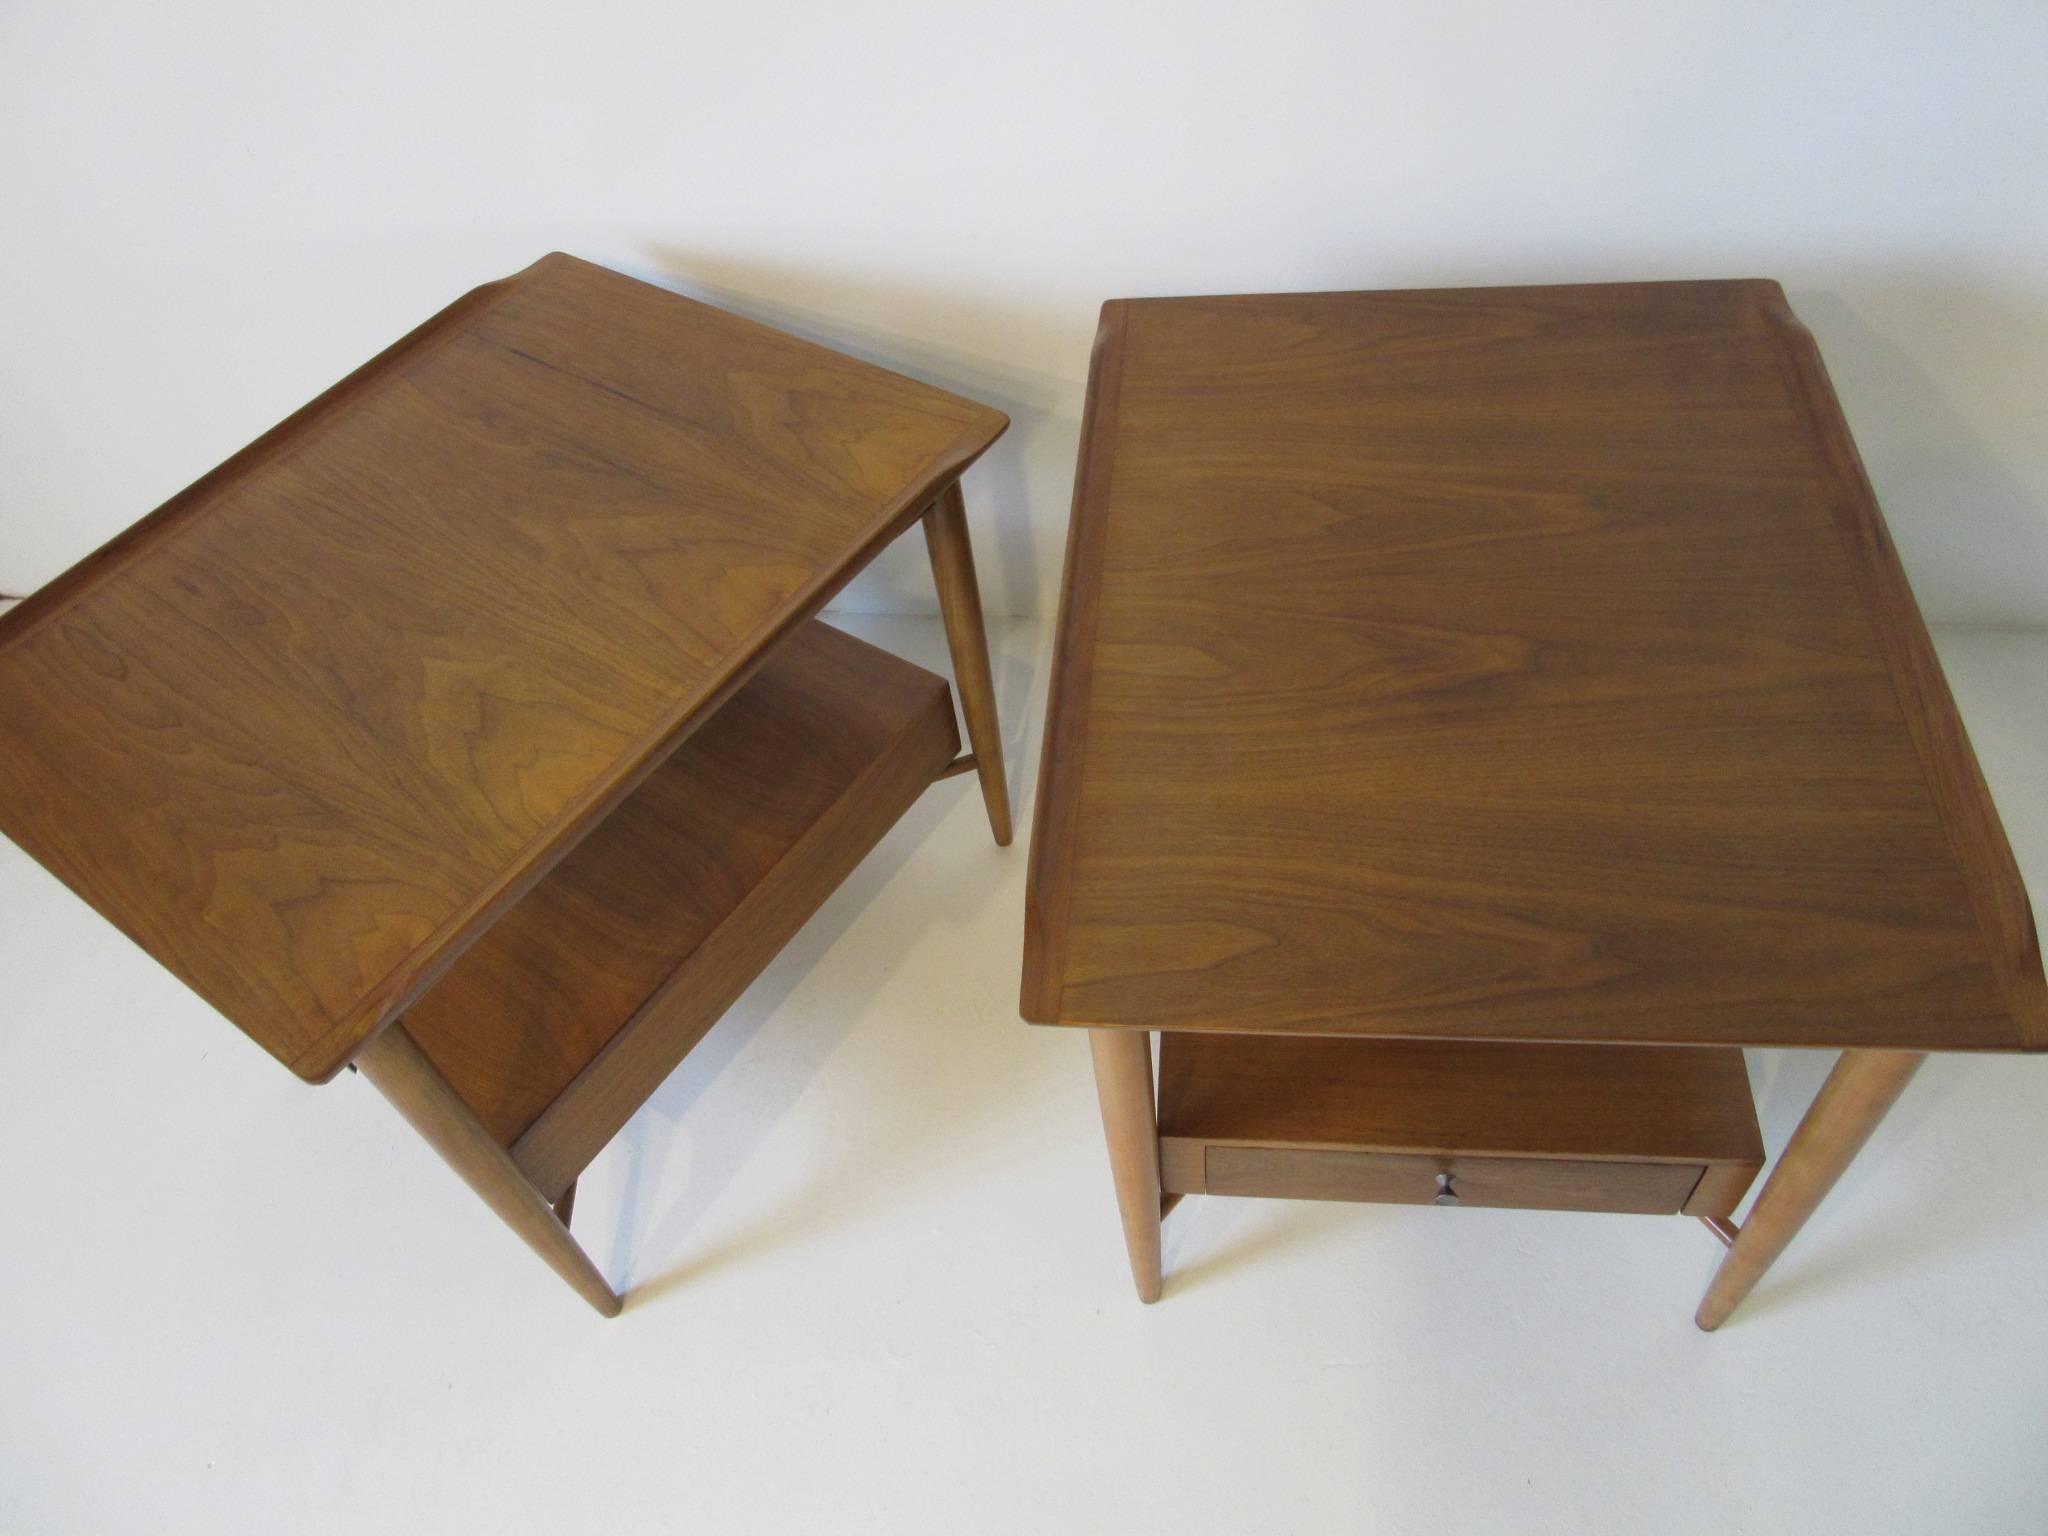 A pair of well grained mahogany end / side tables or nightstands with raised lip edge in the manner of Finn Juhl with single drawer and hourglass pull. The X-stretcher detail below the drawer gives it a floating and light look with coronal legs.